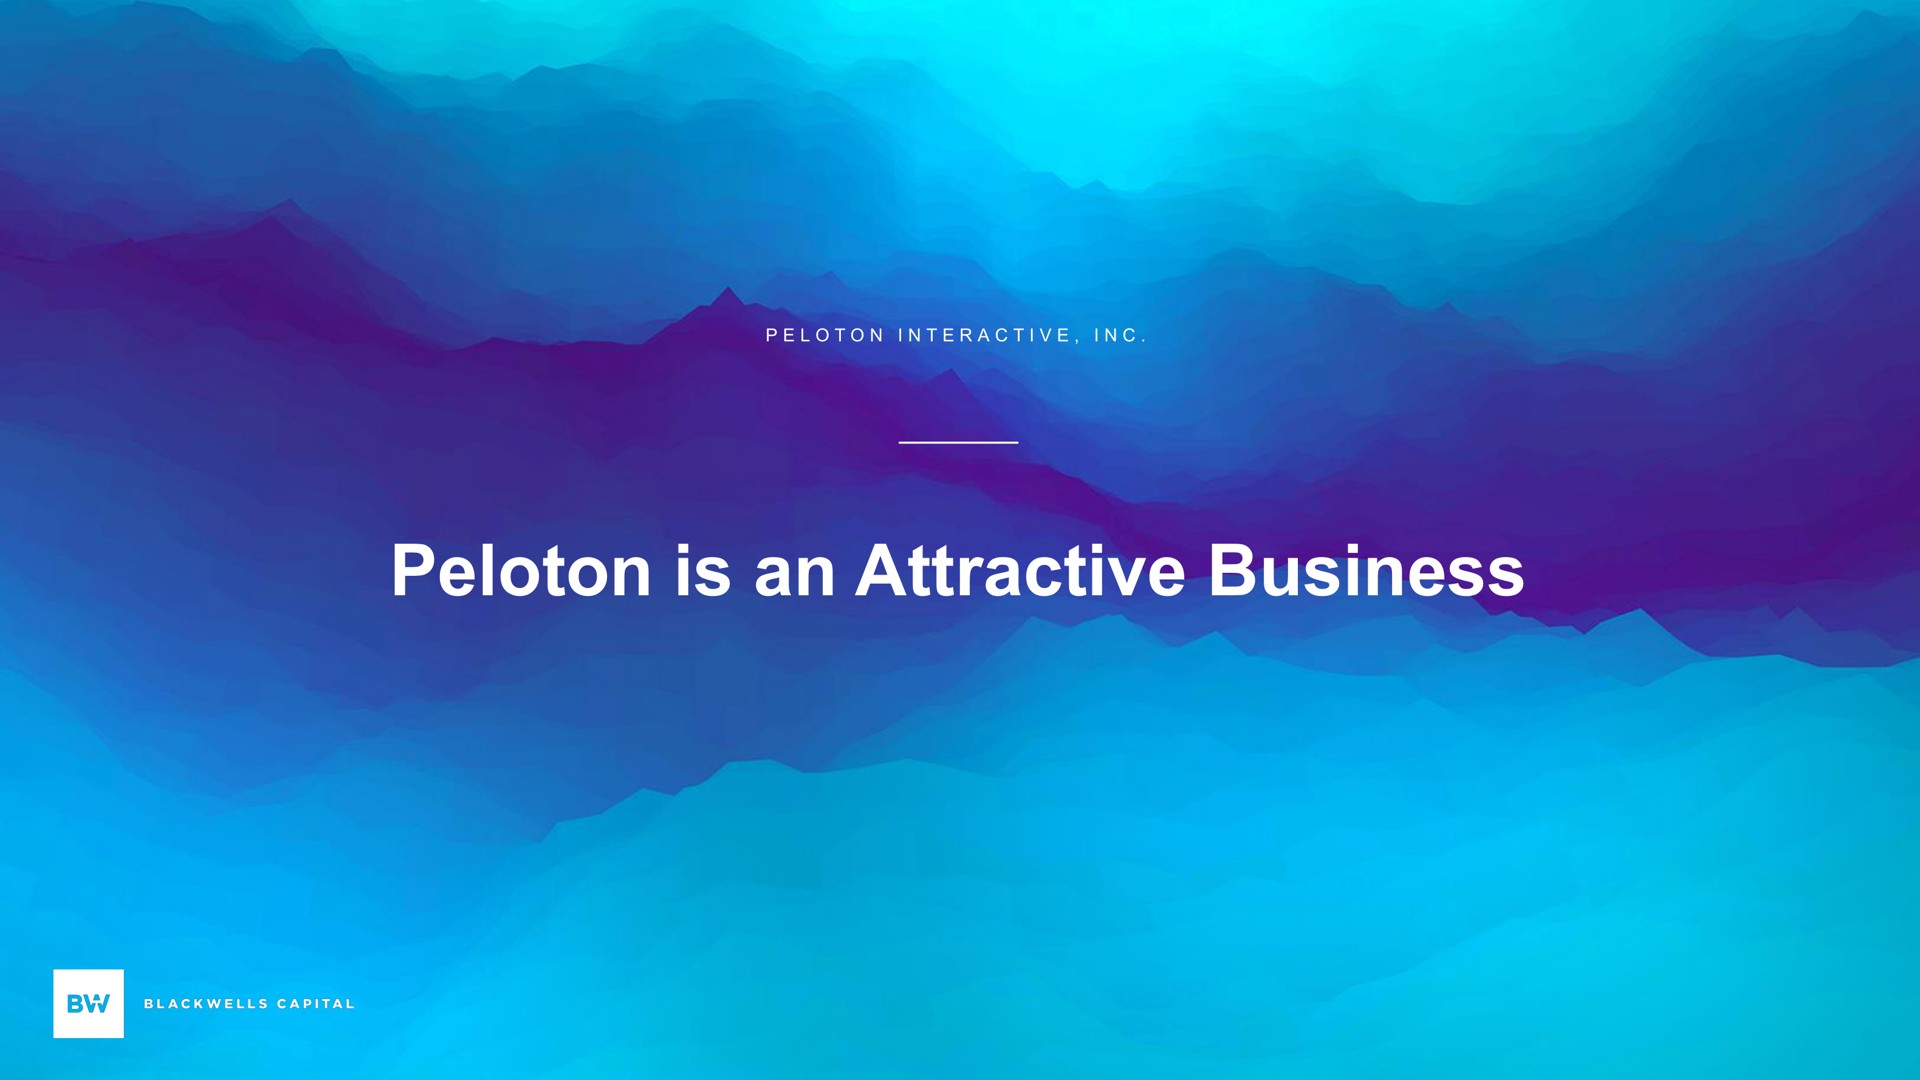 peloton is an attractive business | Blackwells Capital